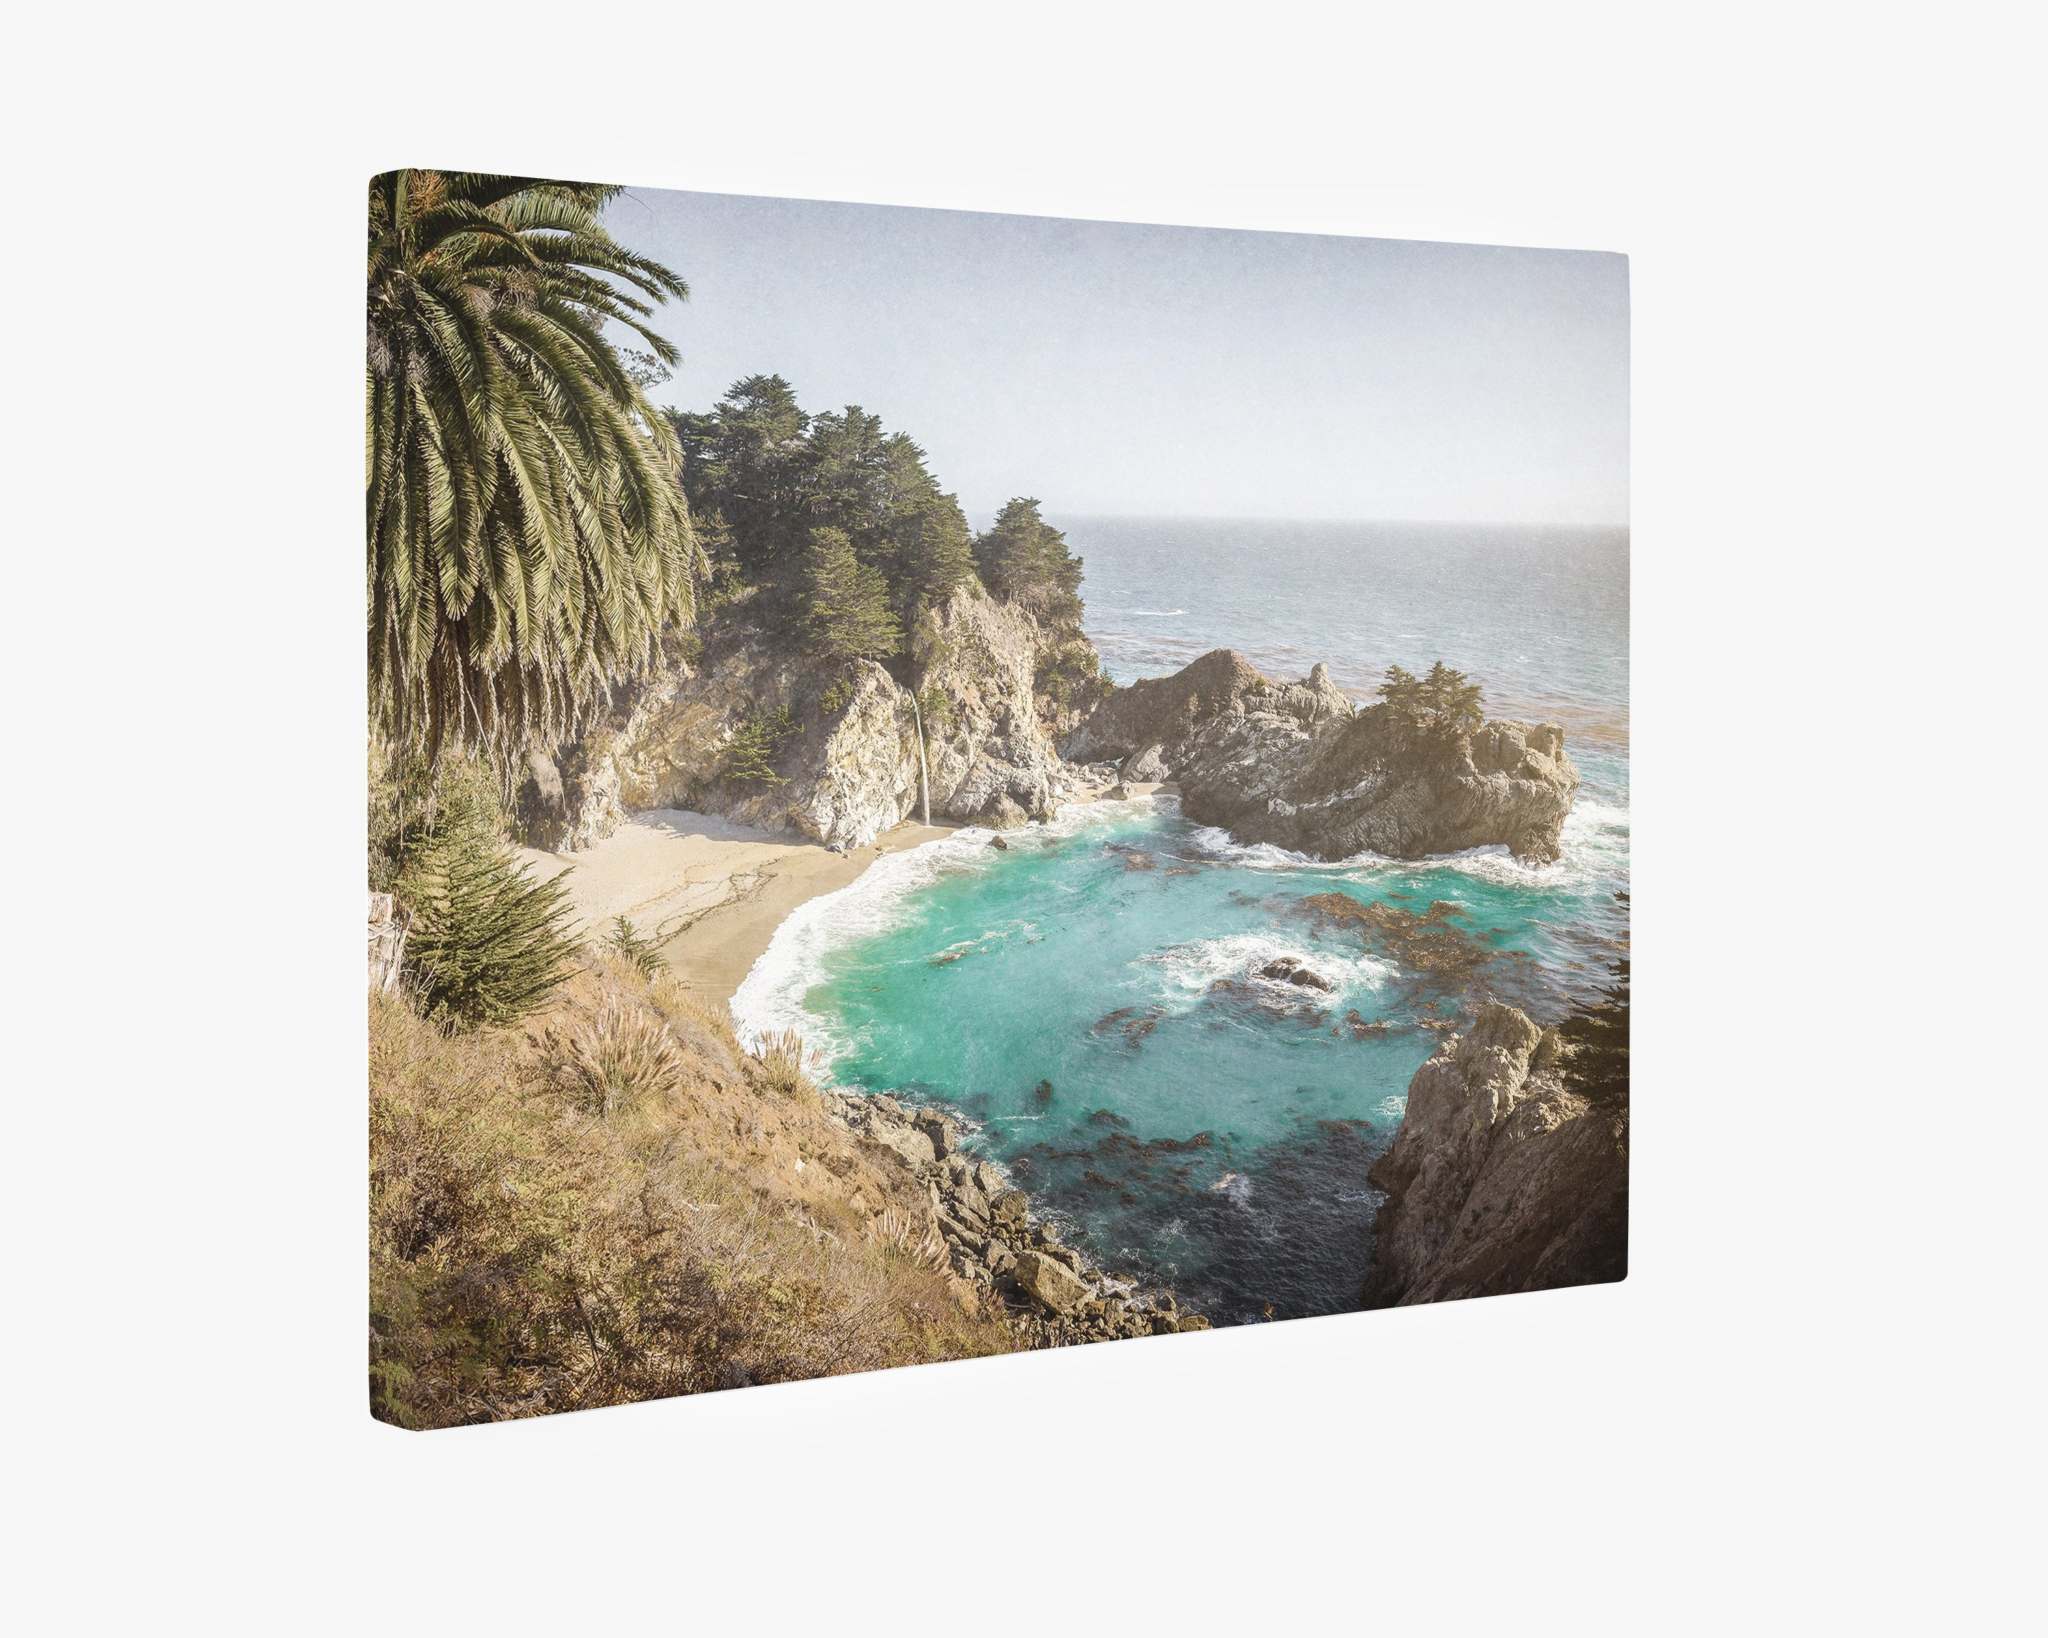 An Offley Green Big Sur Canvas Wall Art, 'Julia Pffeifer,' featuring a secluded beach surrounded by rugged cliffs and lush vegetation. Turquoise waves gently wash onto the shore under a peaceful, clear sky. Dense trees, including a tall palm, cover the cliffside, capturing the essence of Big Sur wall art.